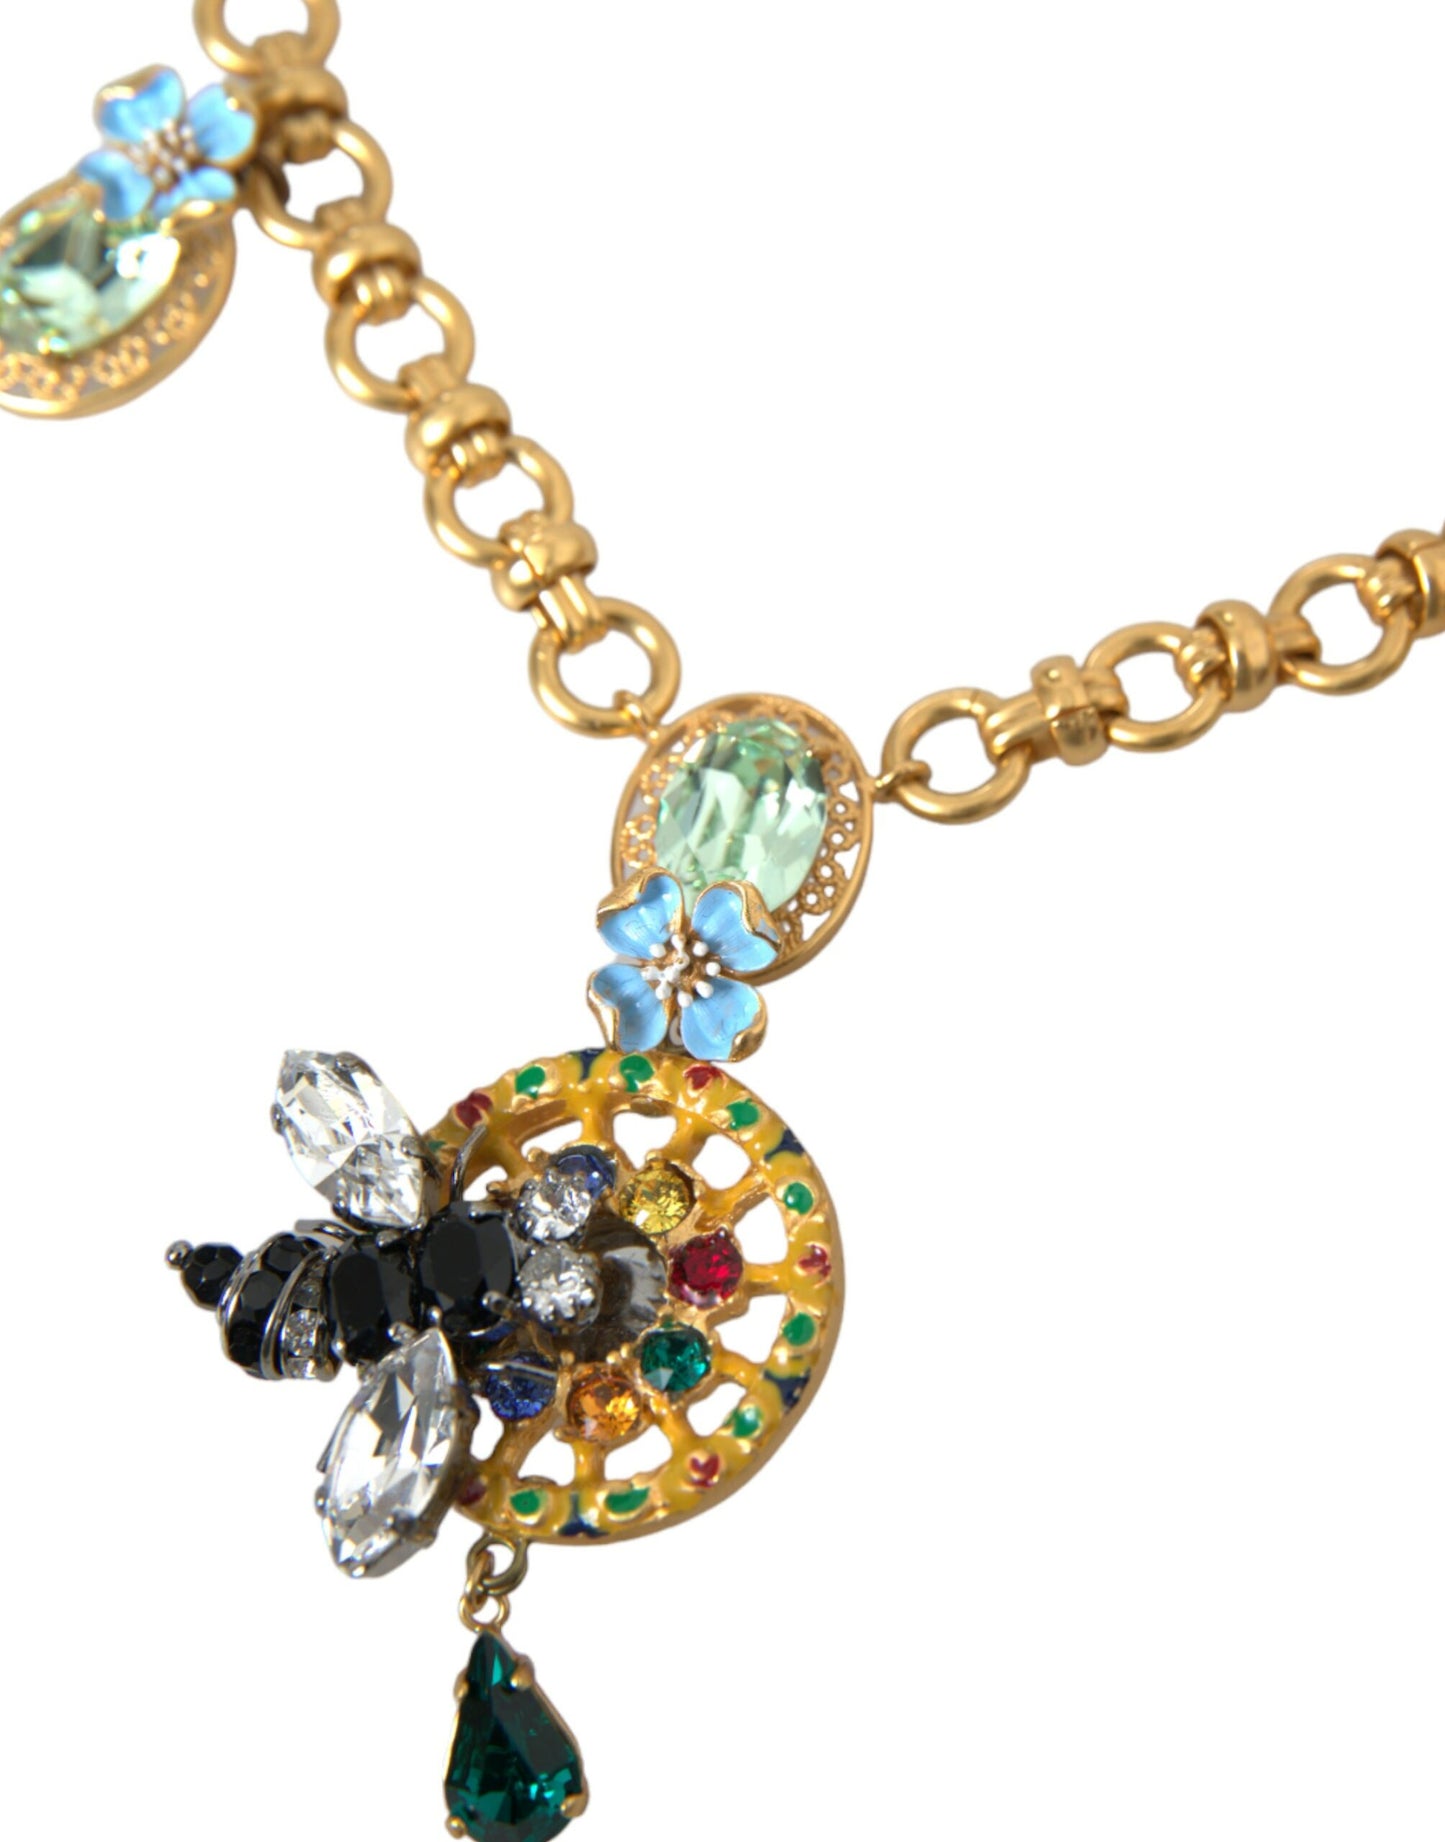 Gold Brass Chain Crystal Bee Pendant Charm Necklace